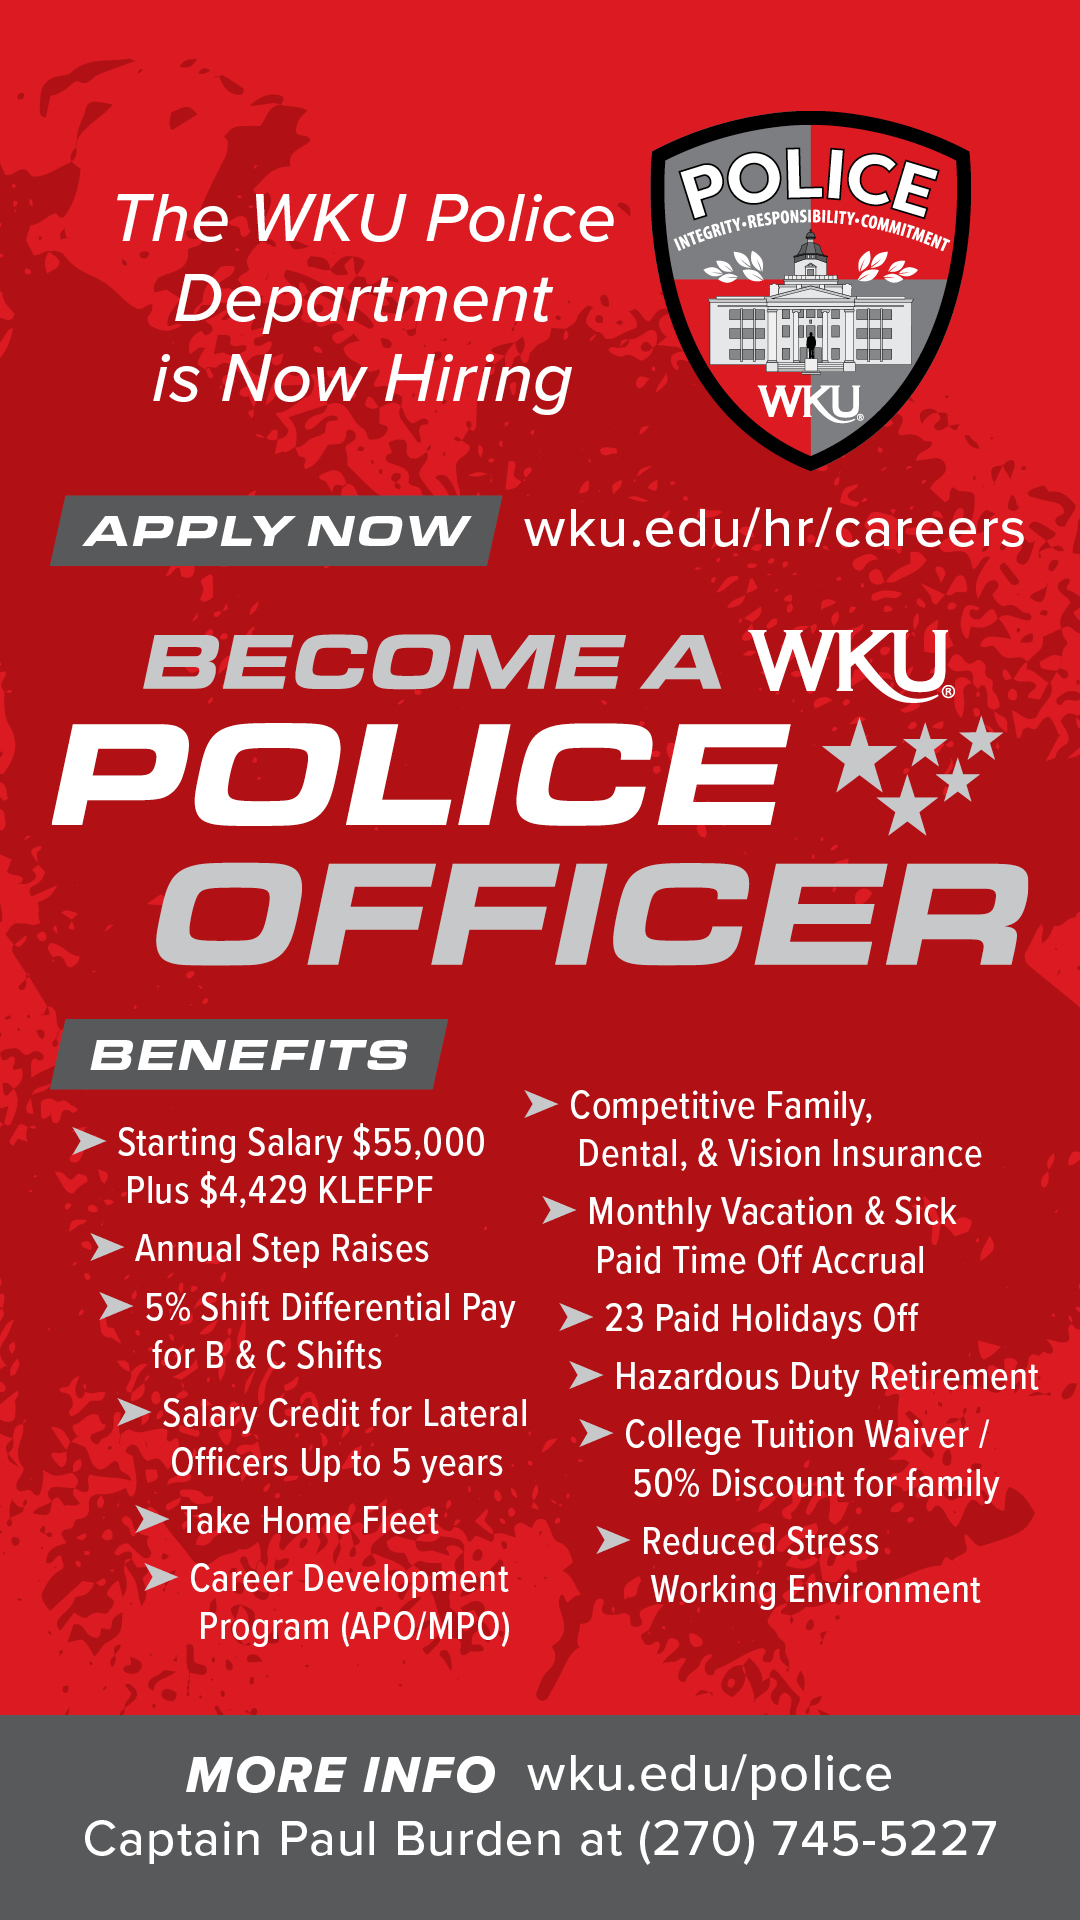 Police hiring poster with benefits